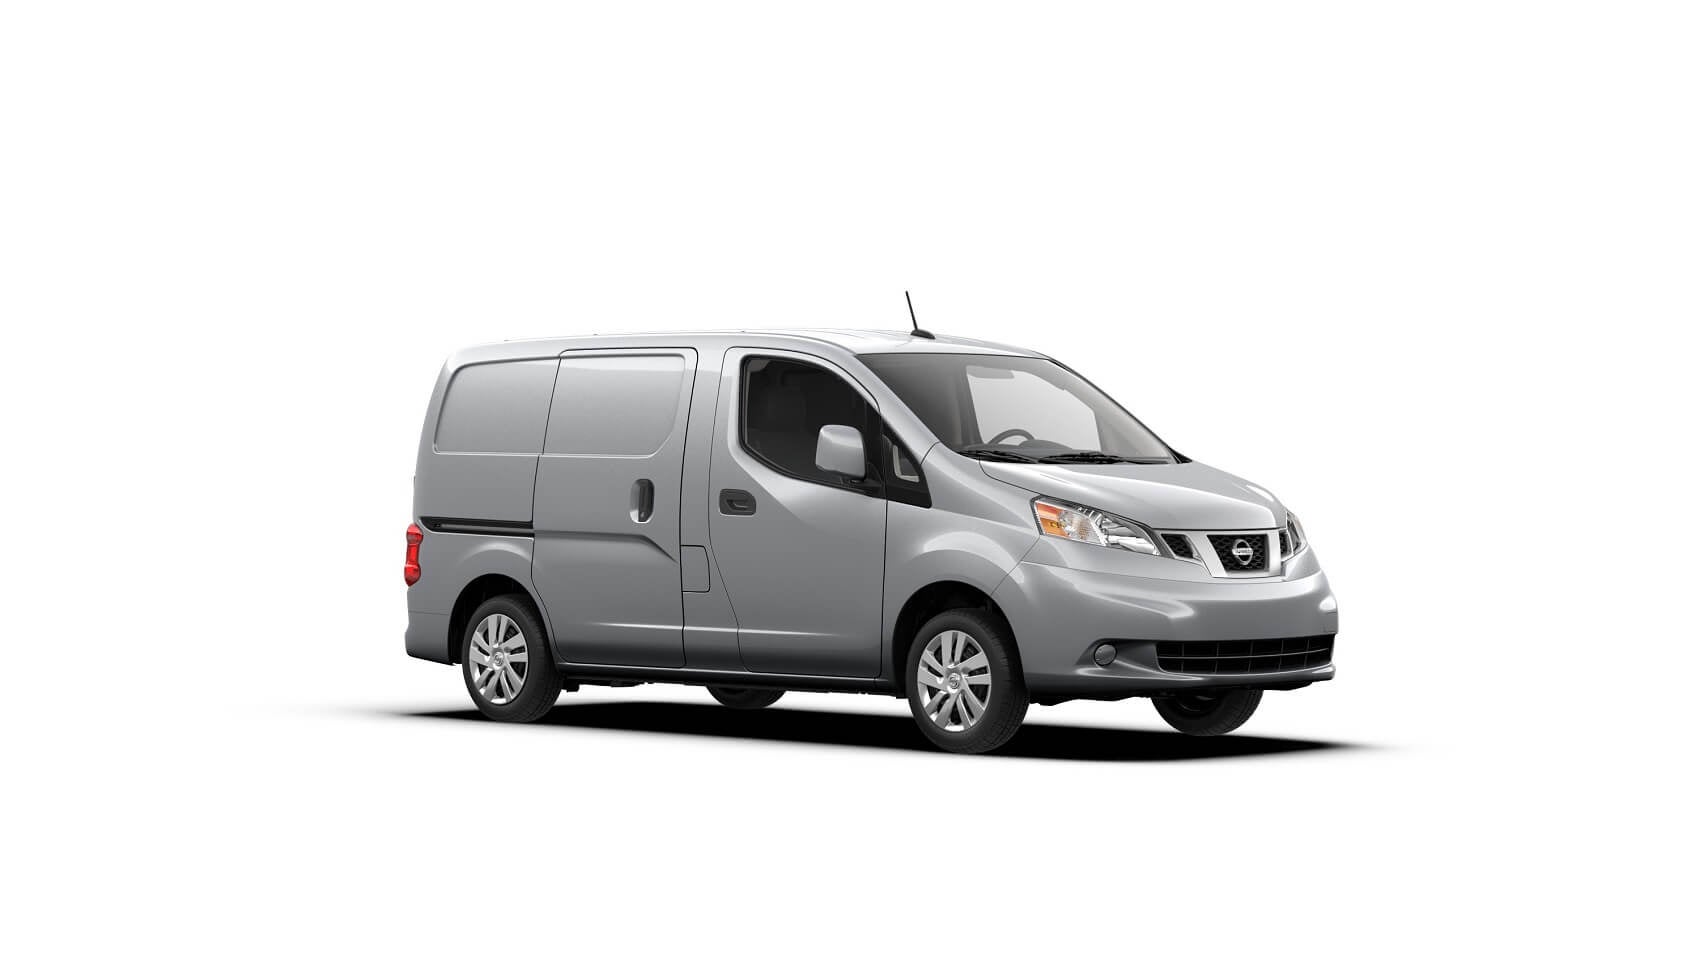 2020 Nissan NV200 Review Avon IN 